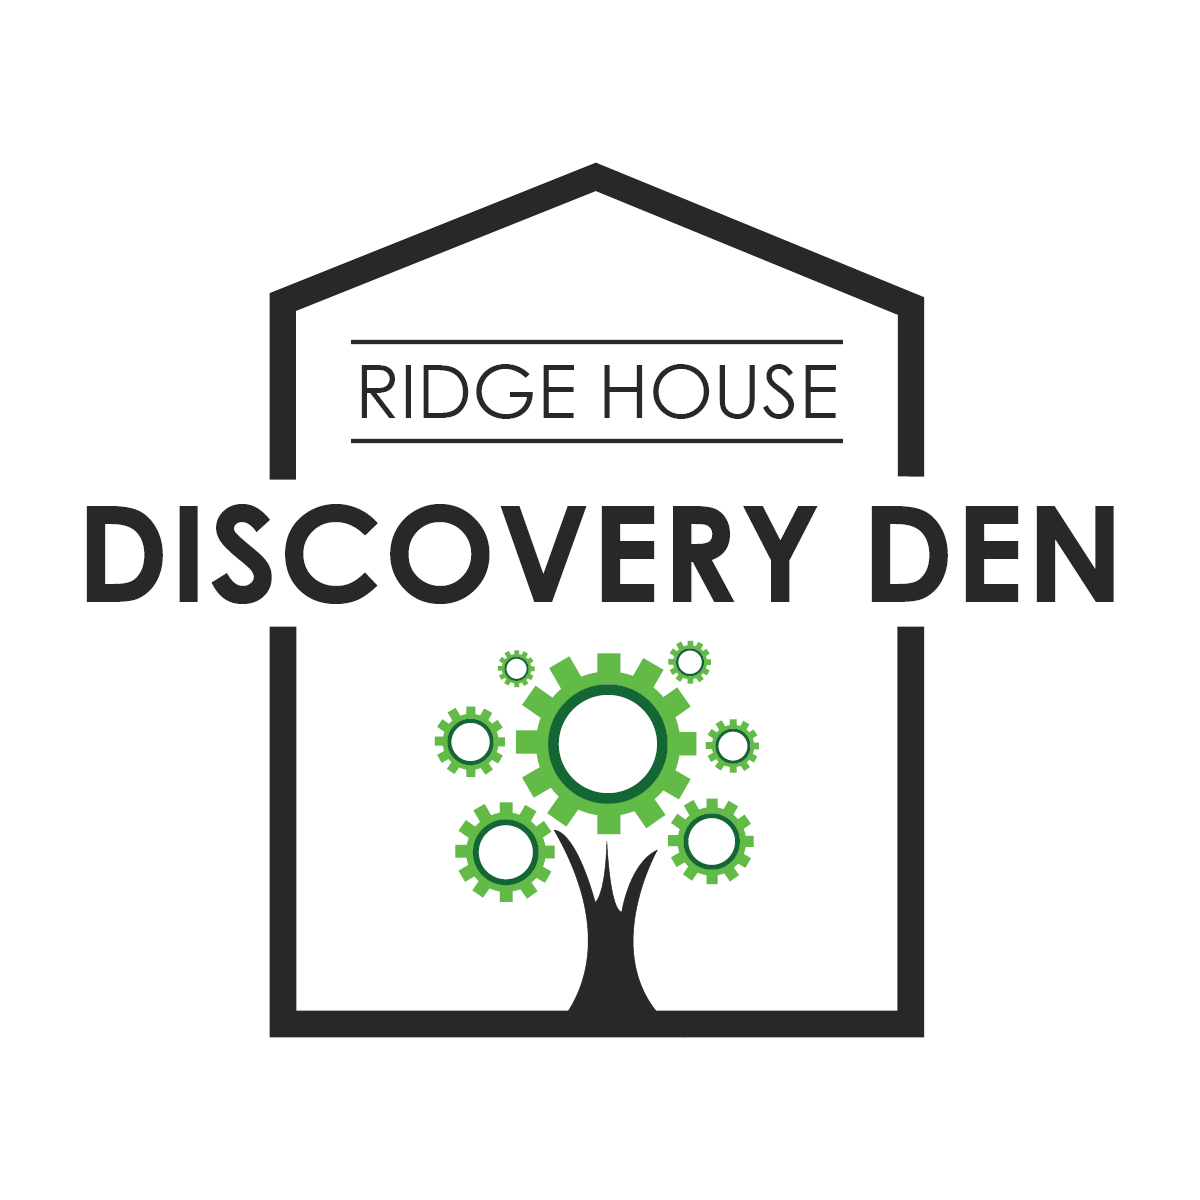 Discovery Den at Ridge House Museum